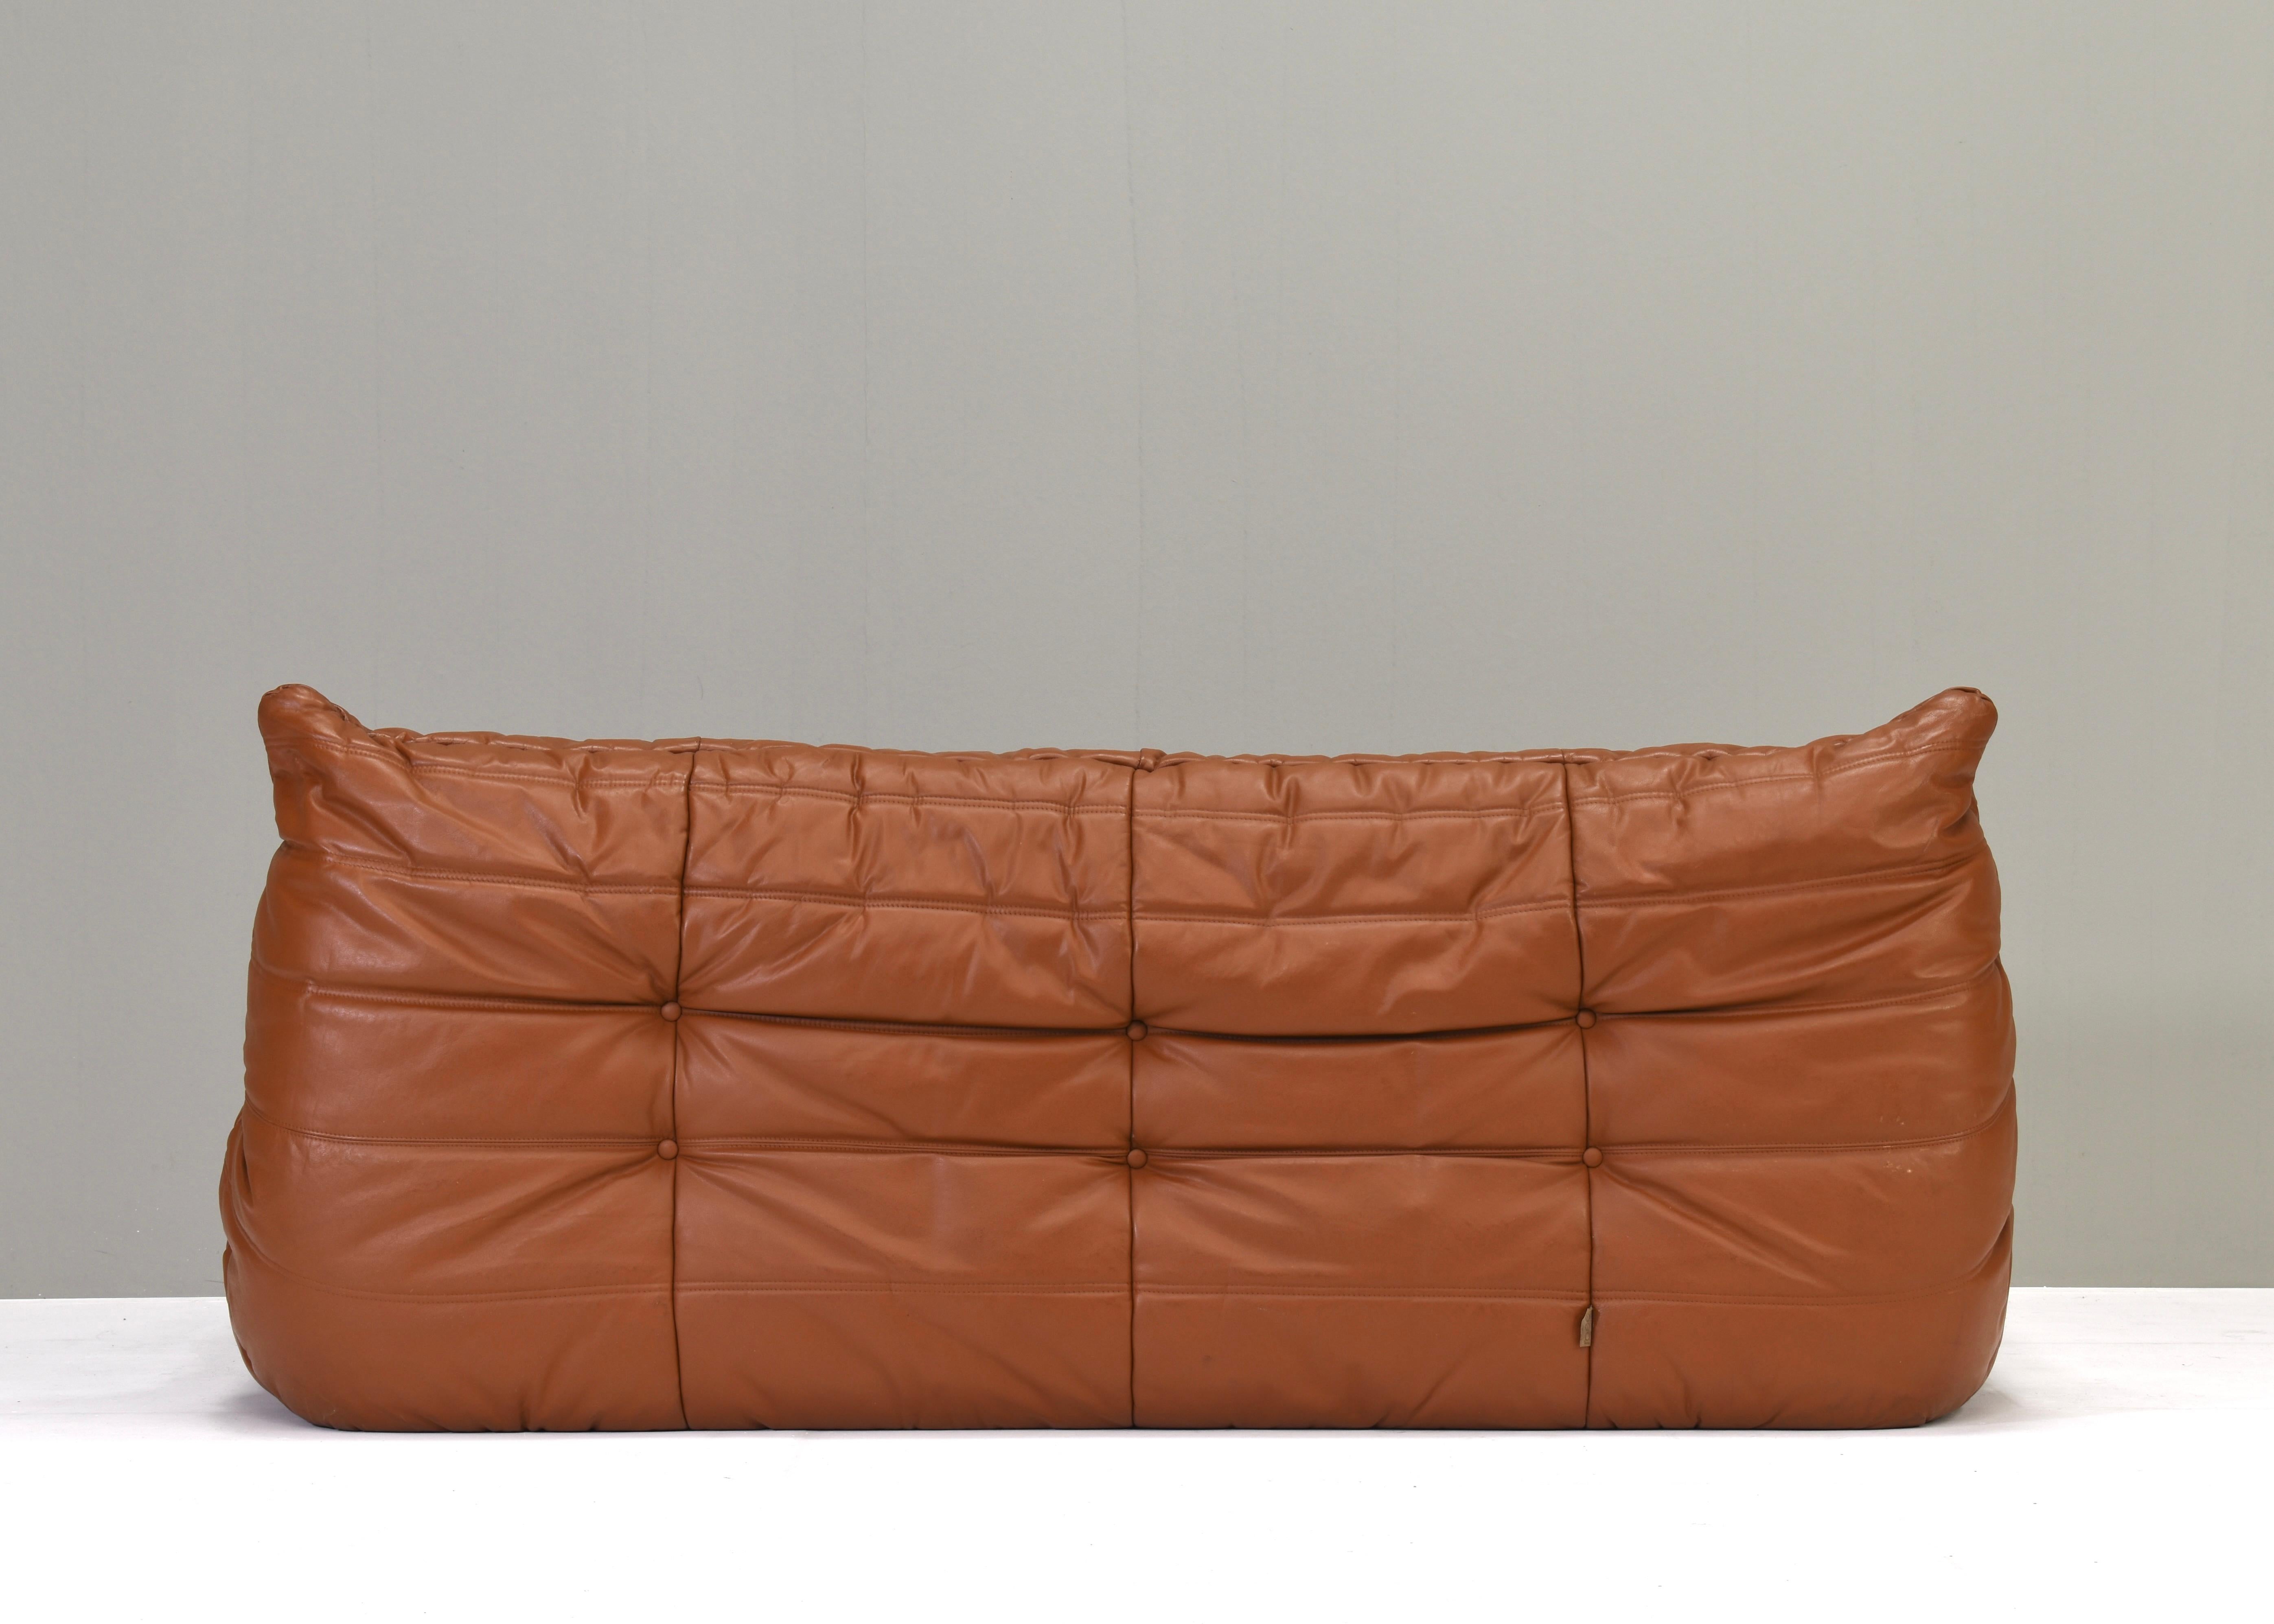 Mid-Century Modern Togo Sofa by Michel Ducaroy for Ligne Roset in Tan Leather France, circa 1970